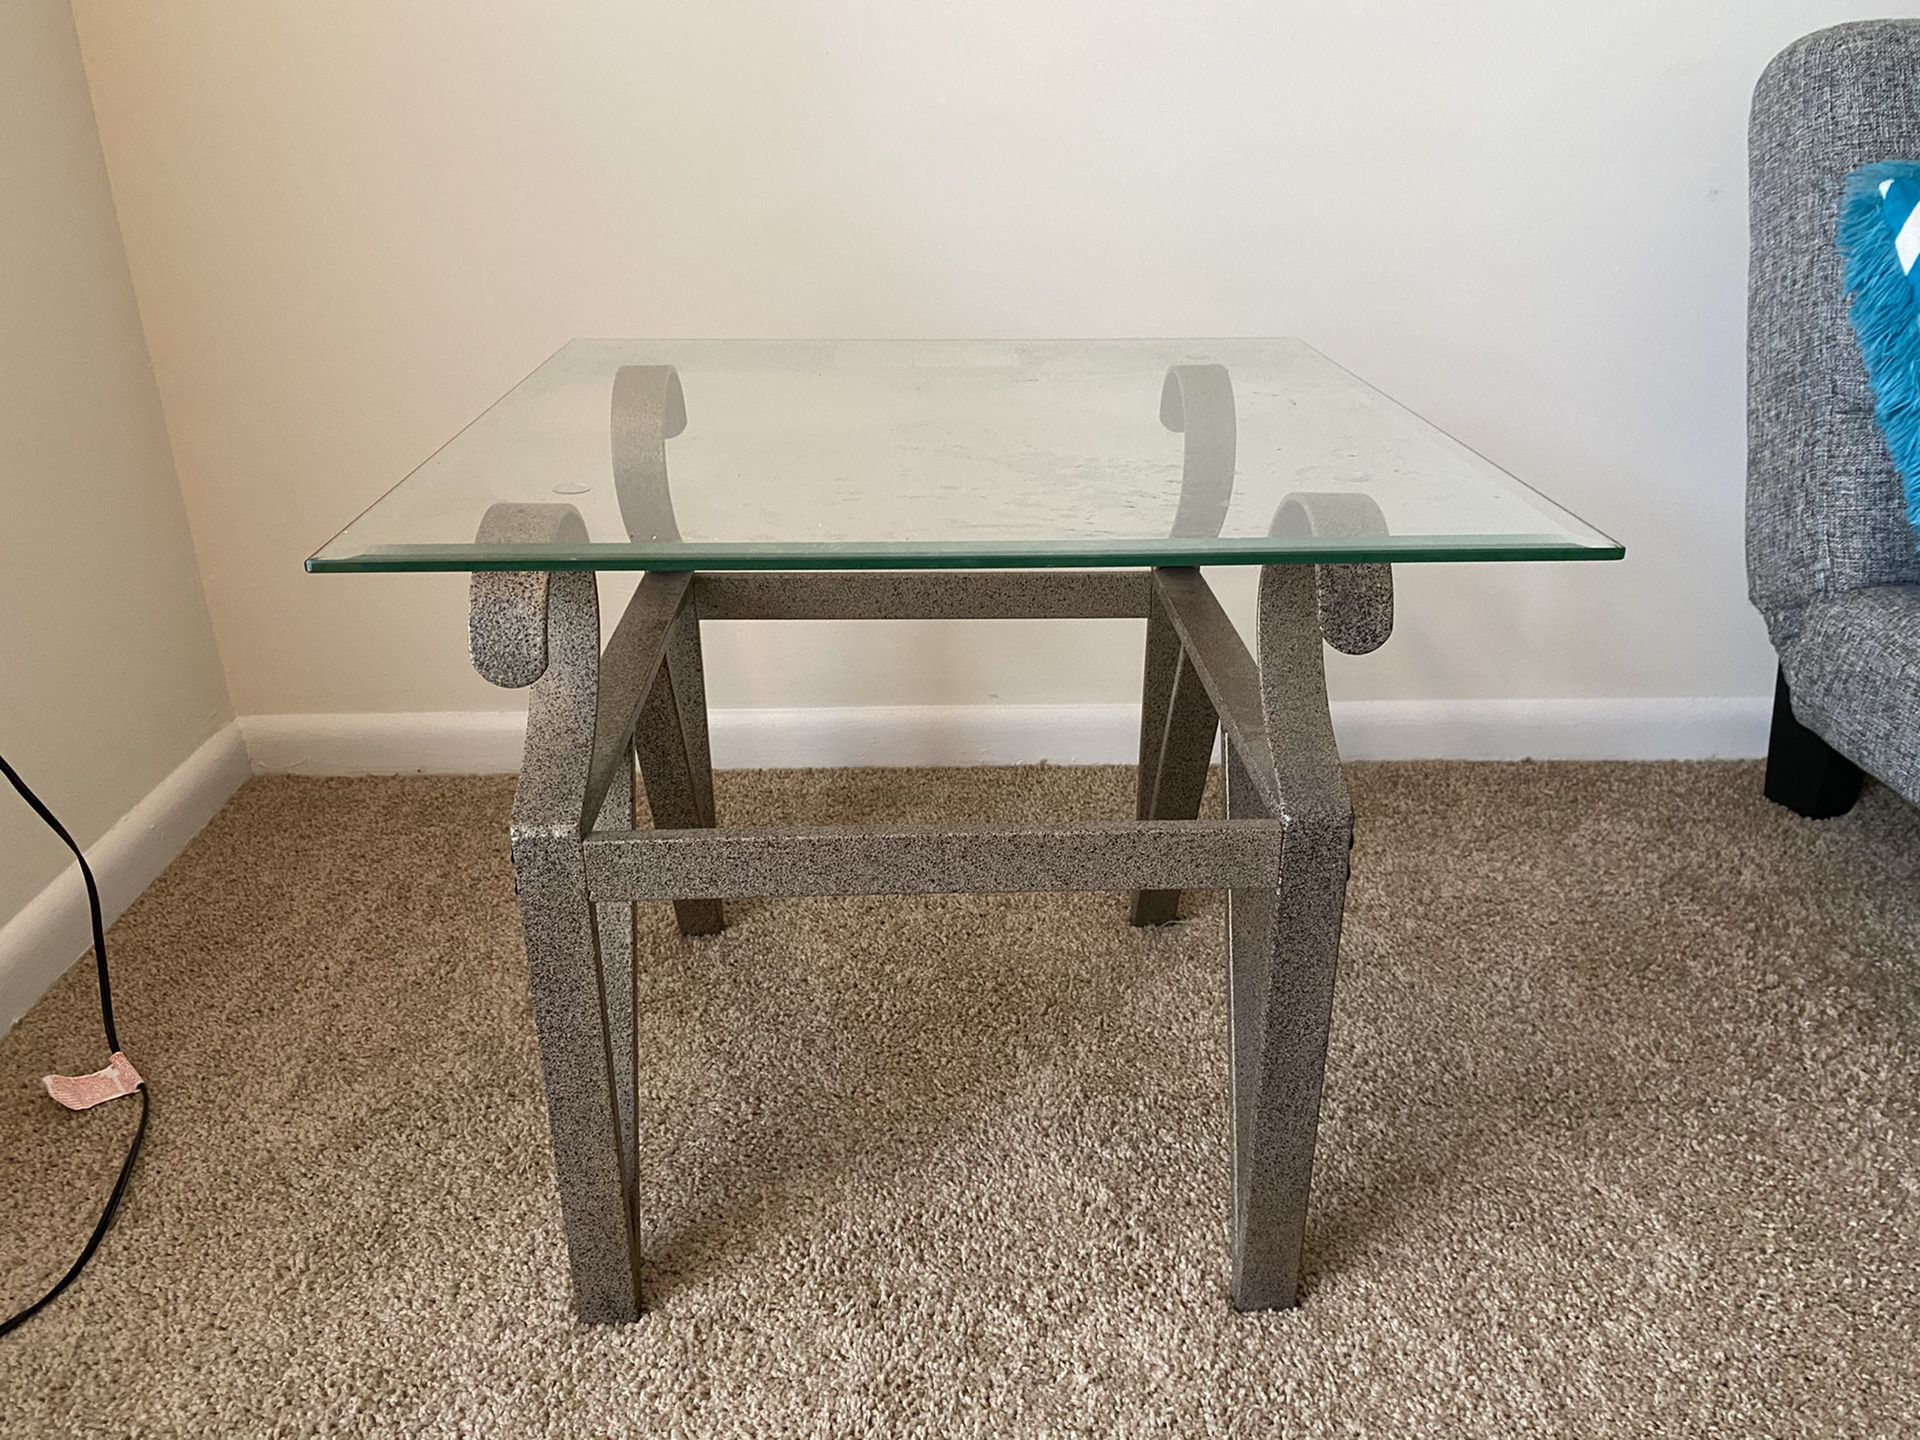 2 glass end tables